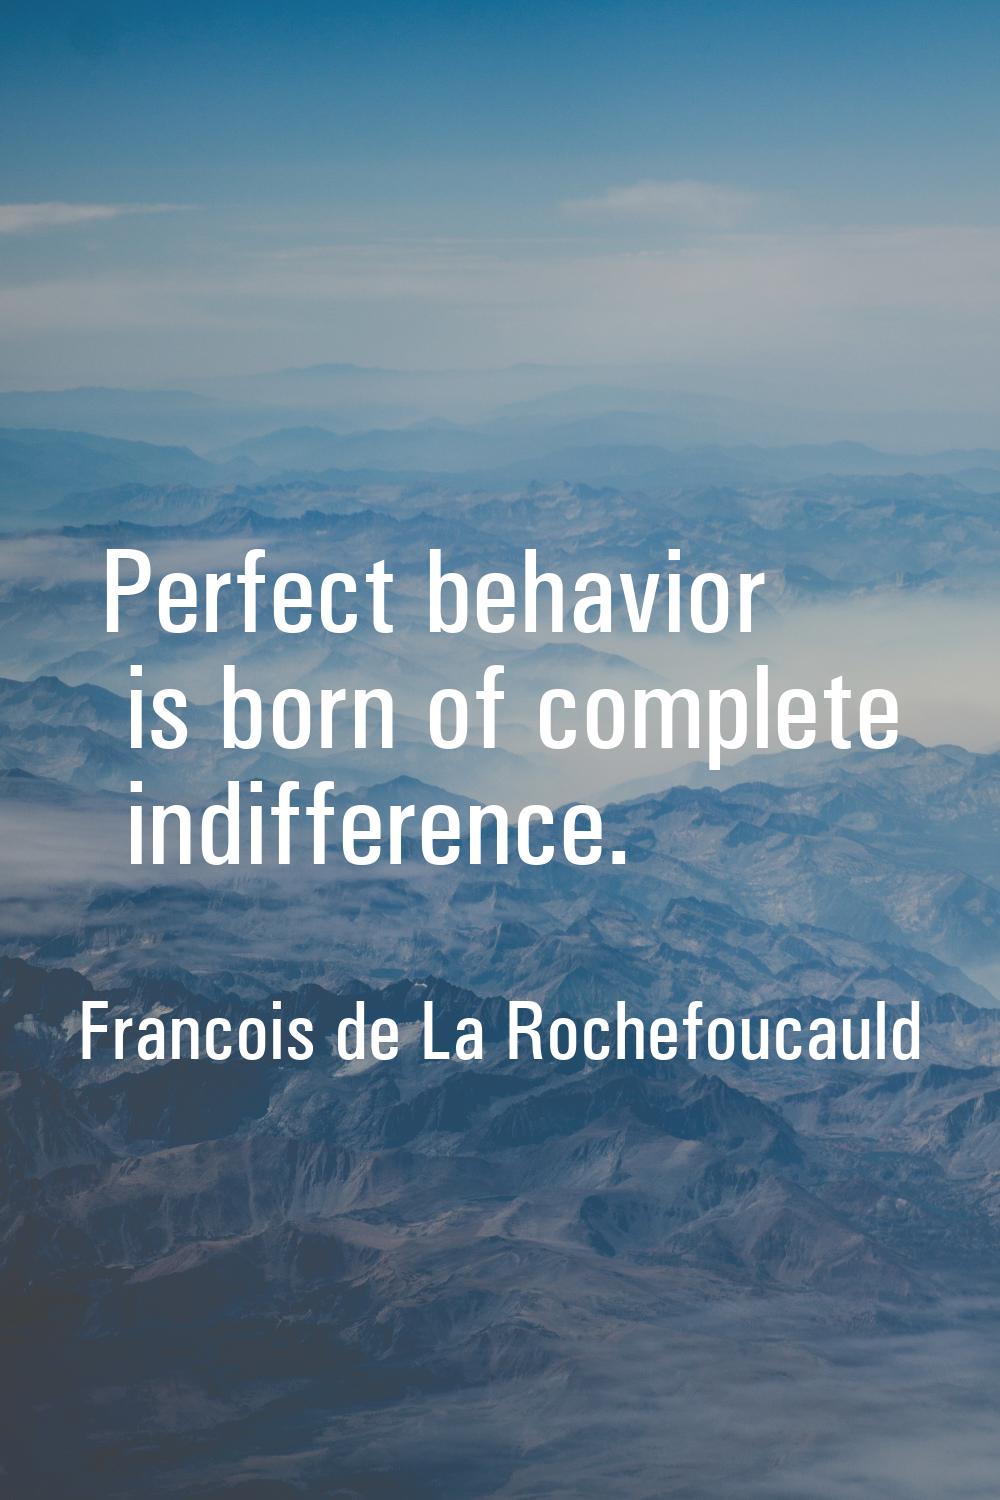 Perfect behavior is born of complete indifference.